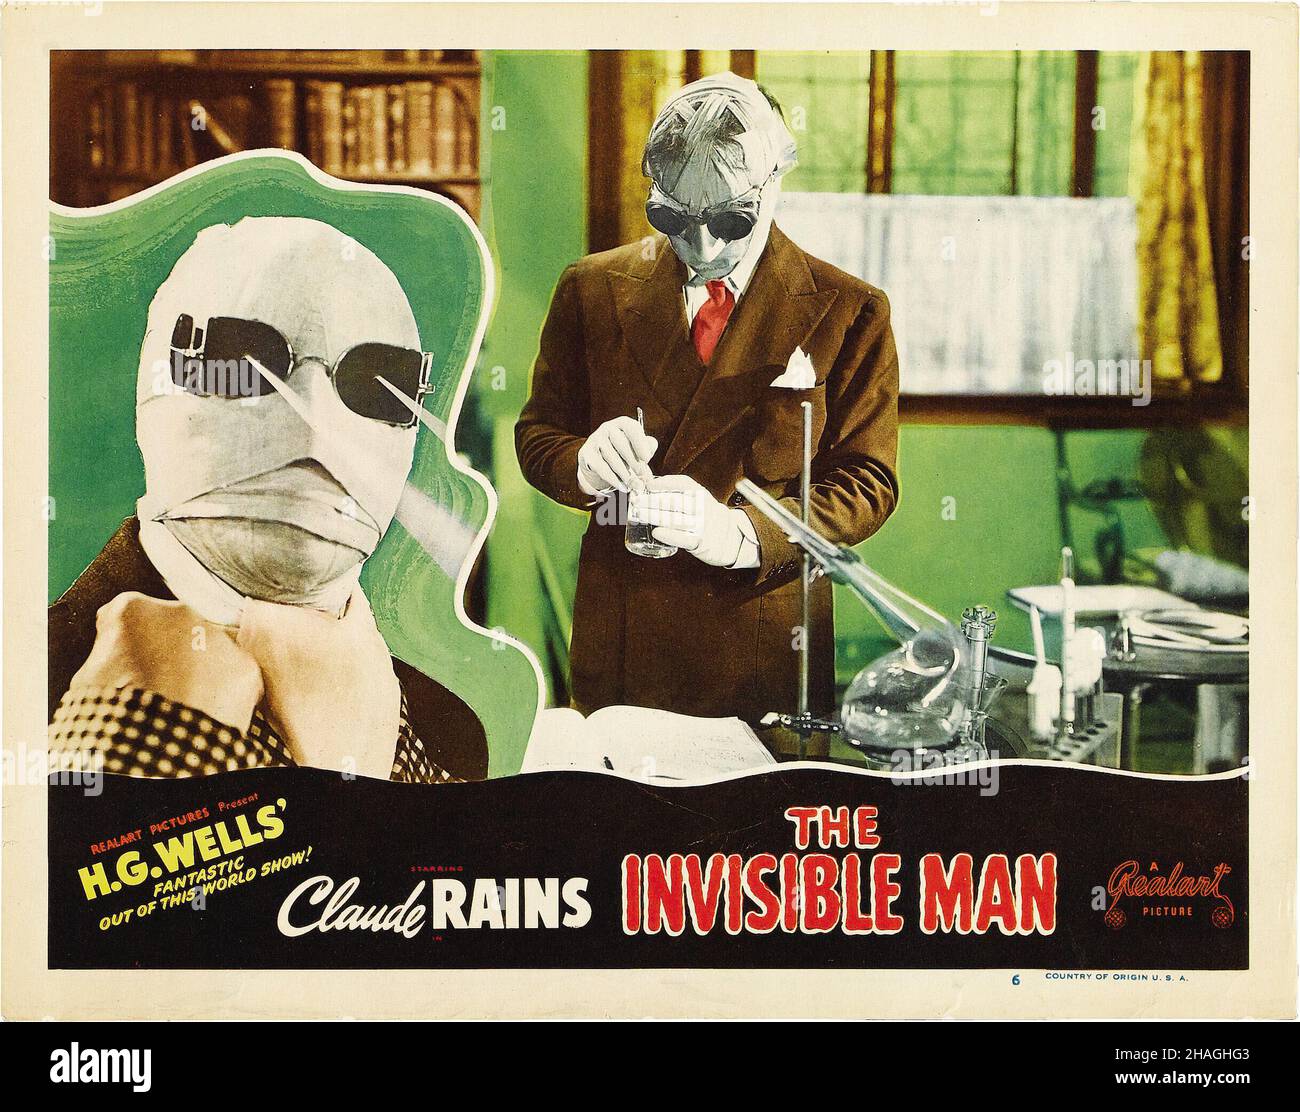 THE INVISIBLE MAN (1933), directed by JAMES WHALE. Credit: UNIVERSAL PICTURES / Album Stock Photo